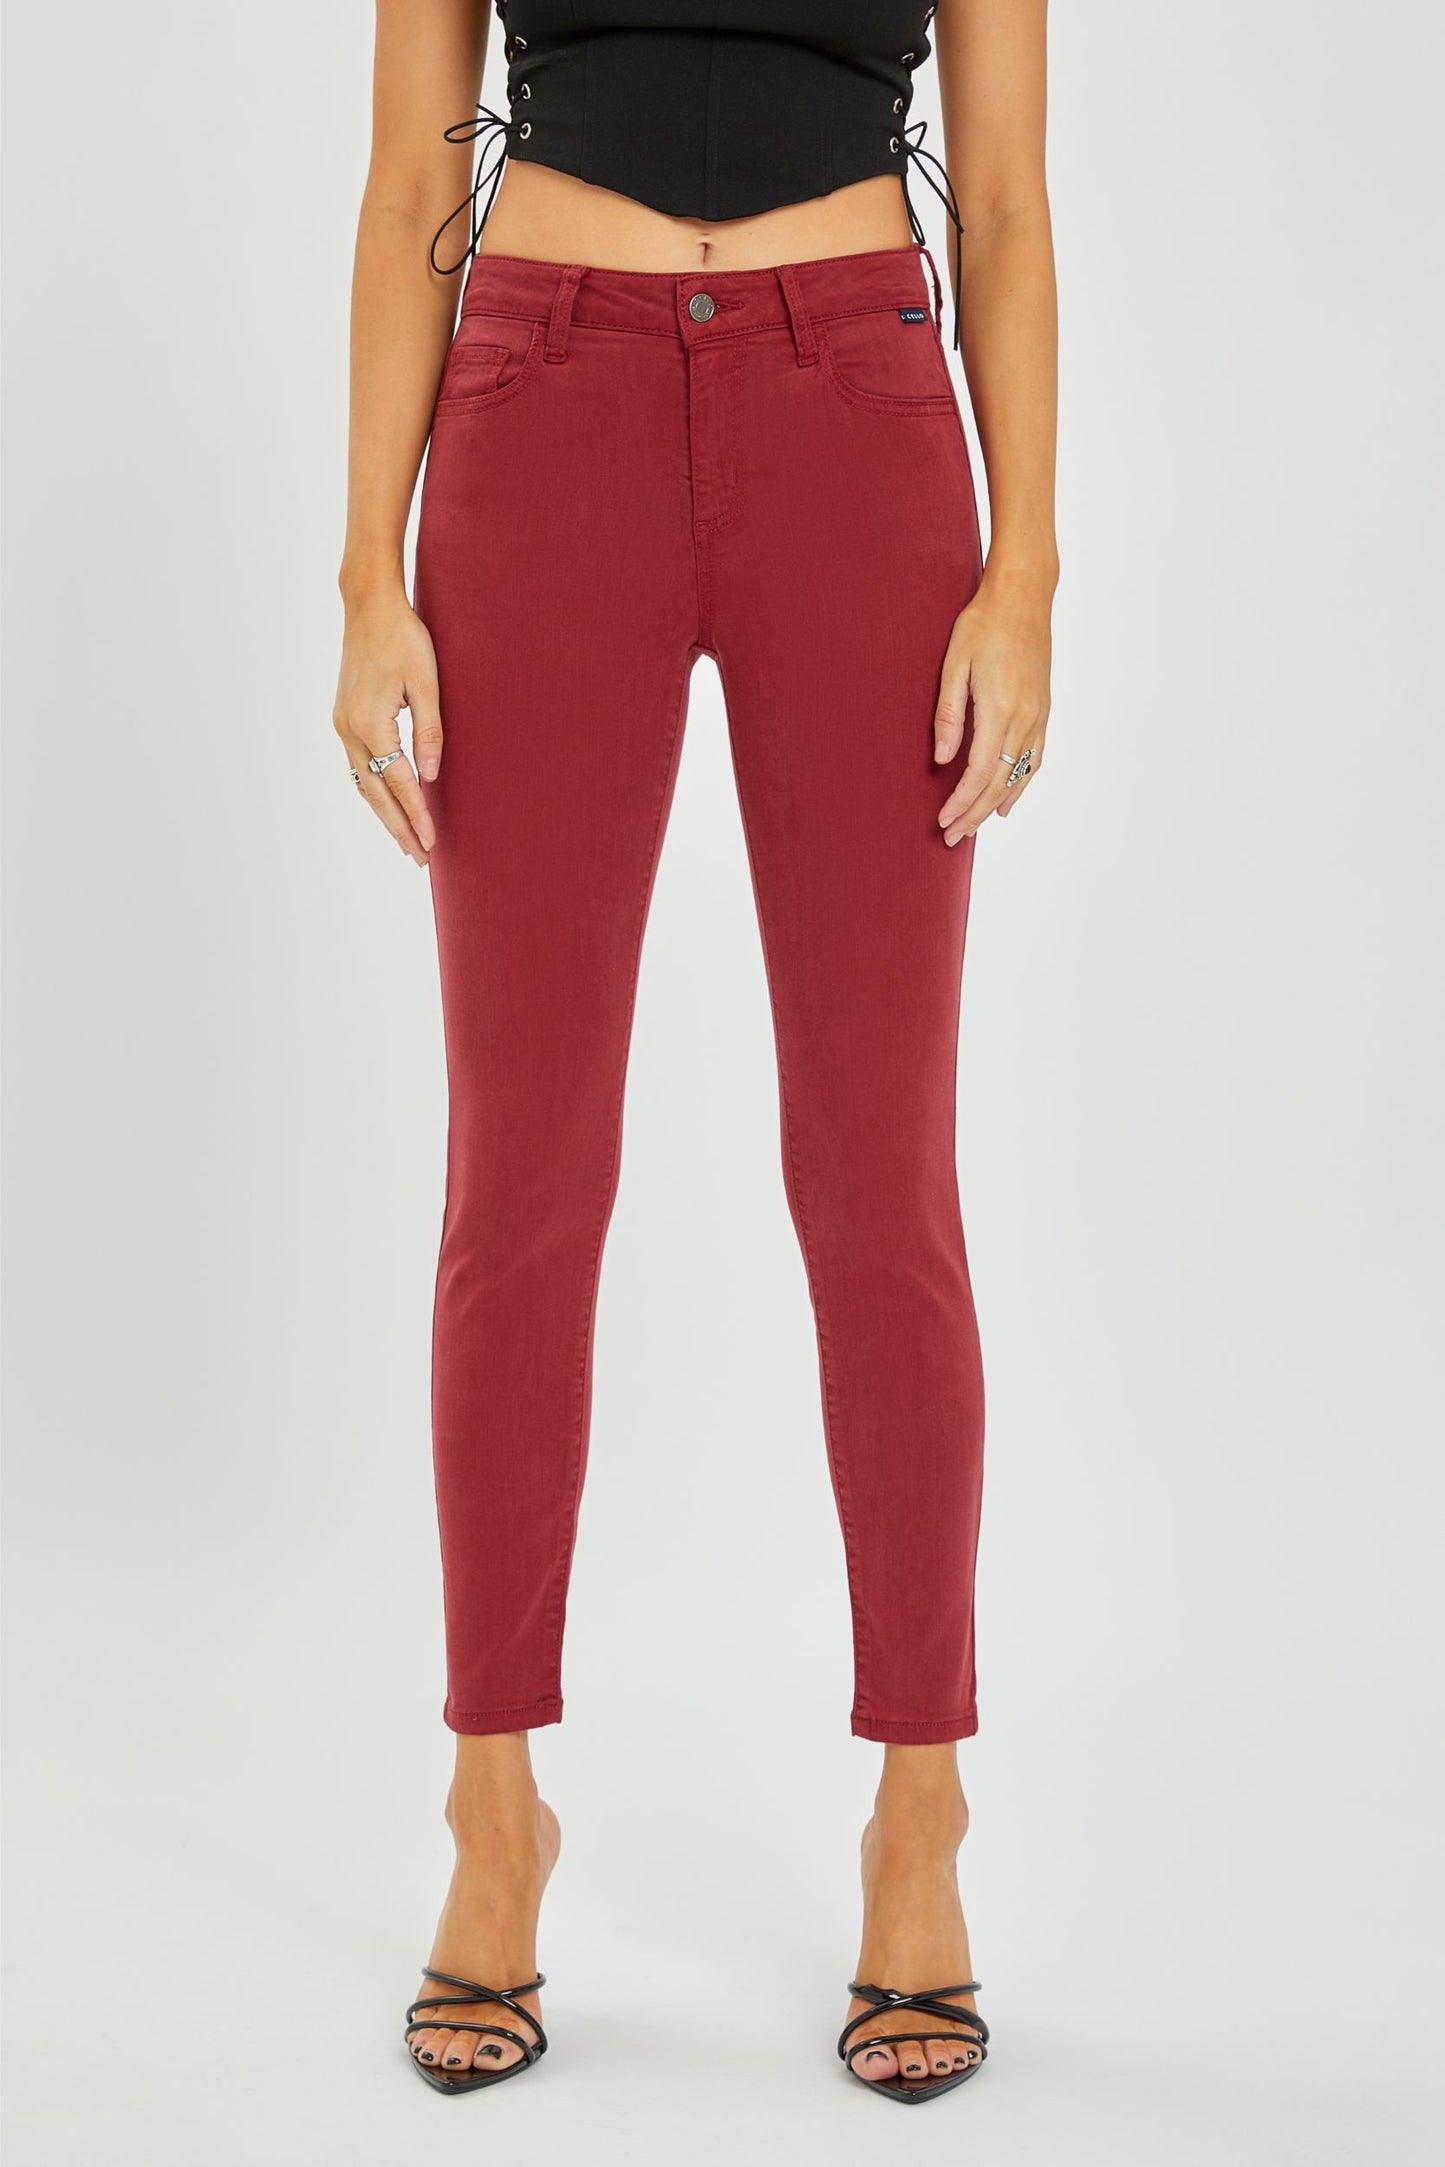 Cello Mid Rise Crop Skinny